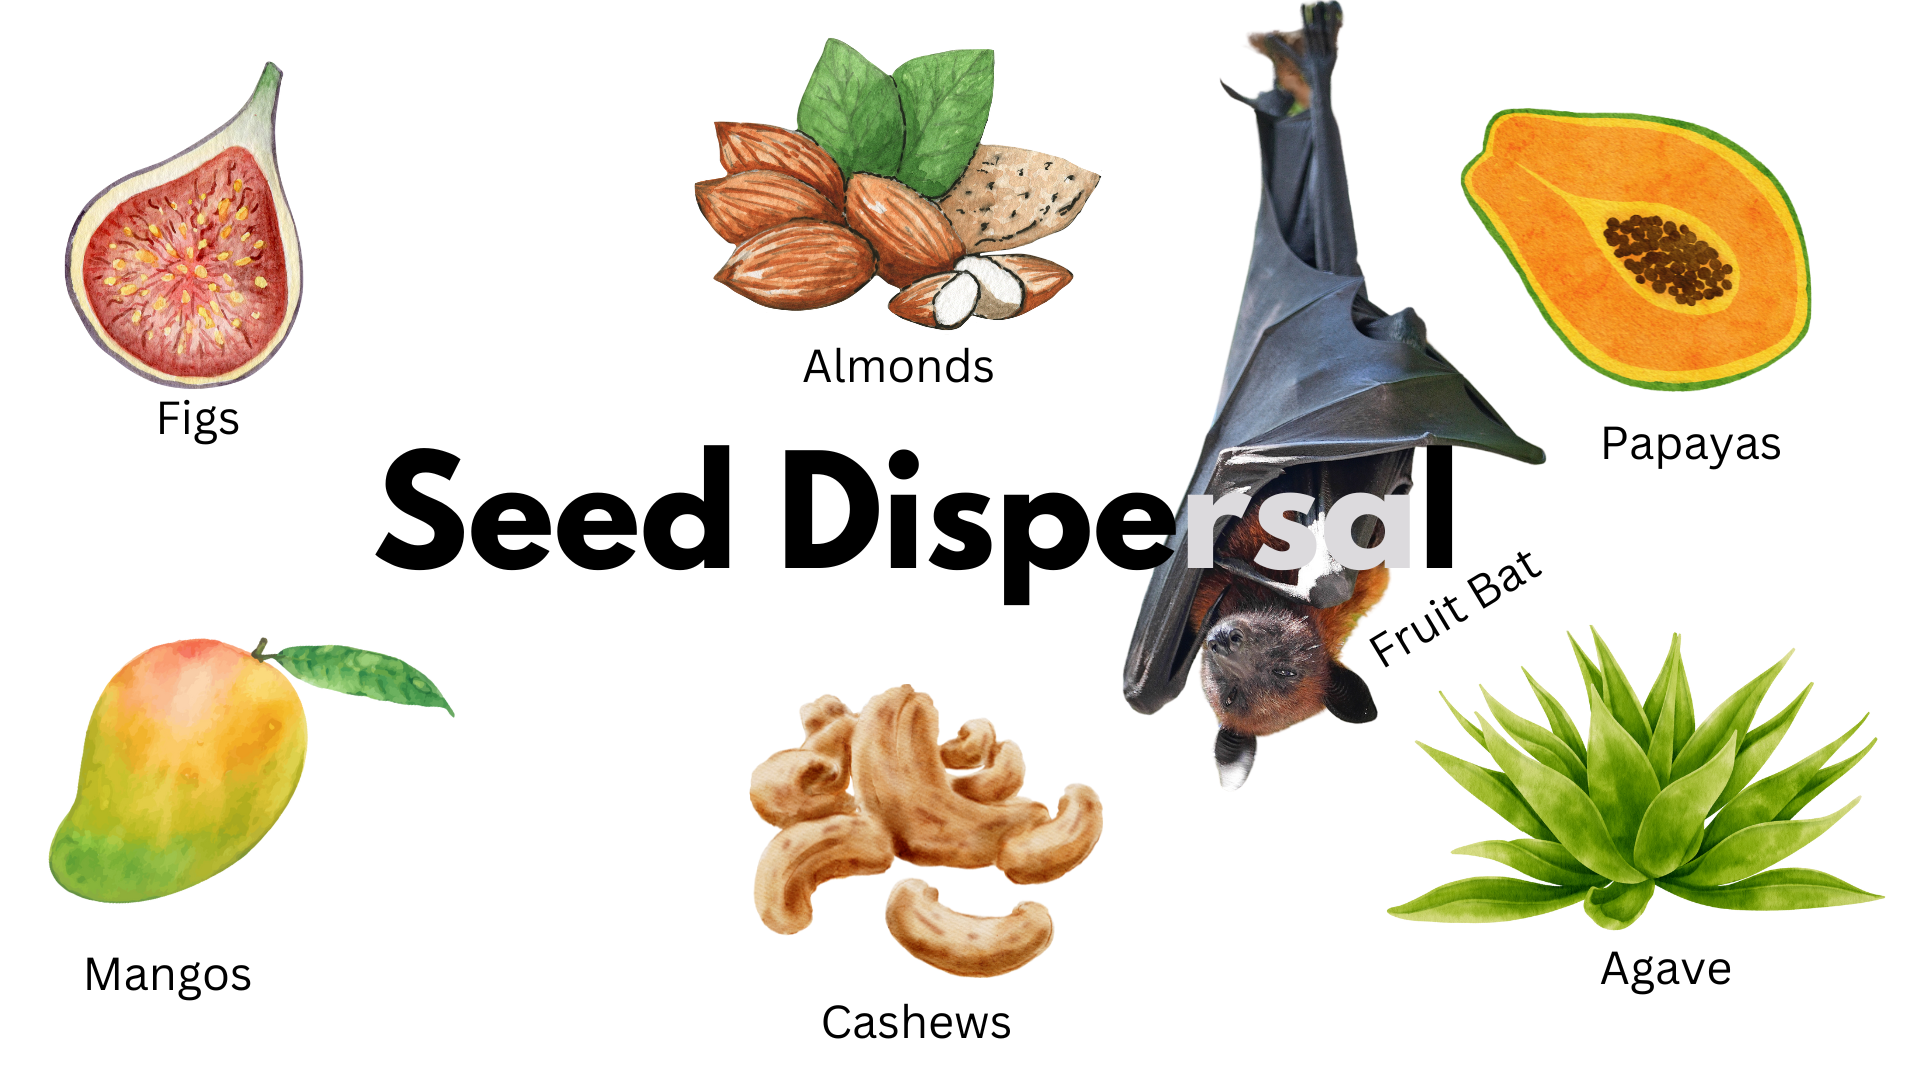 A fruit bat hangs upside down with images of foods with seeds that are dispersed by bats. Text reads: Seed dispersal, figs, almonds, papayas, agave, cashews, mangos